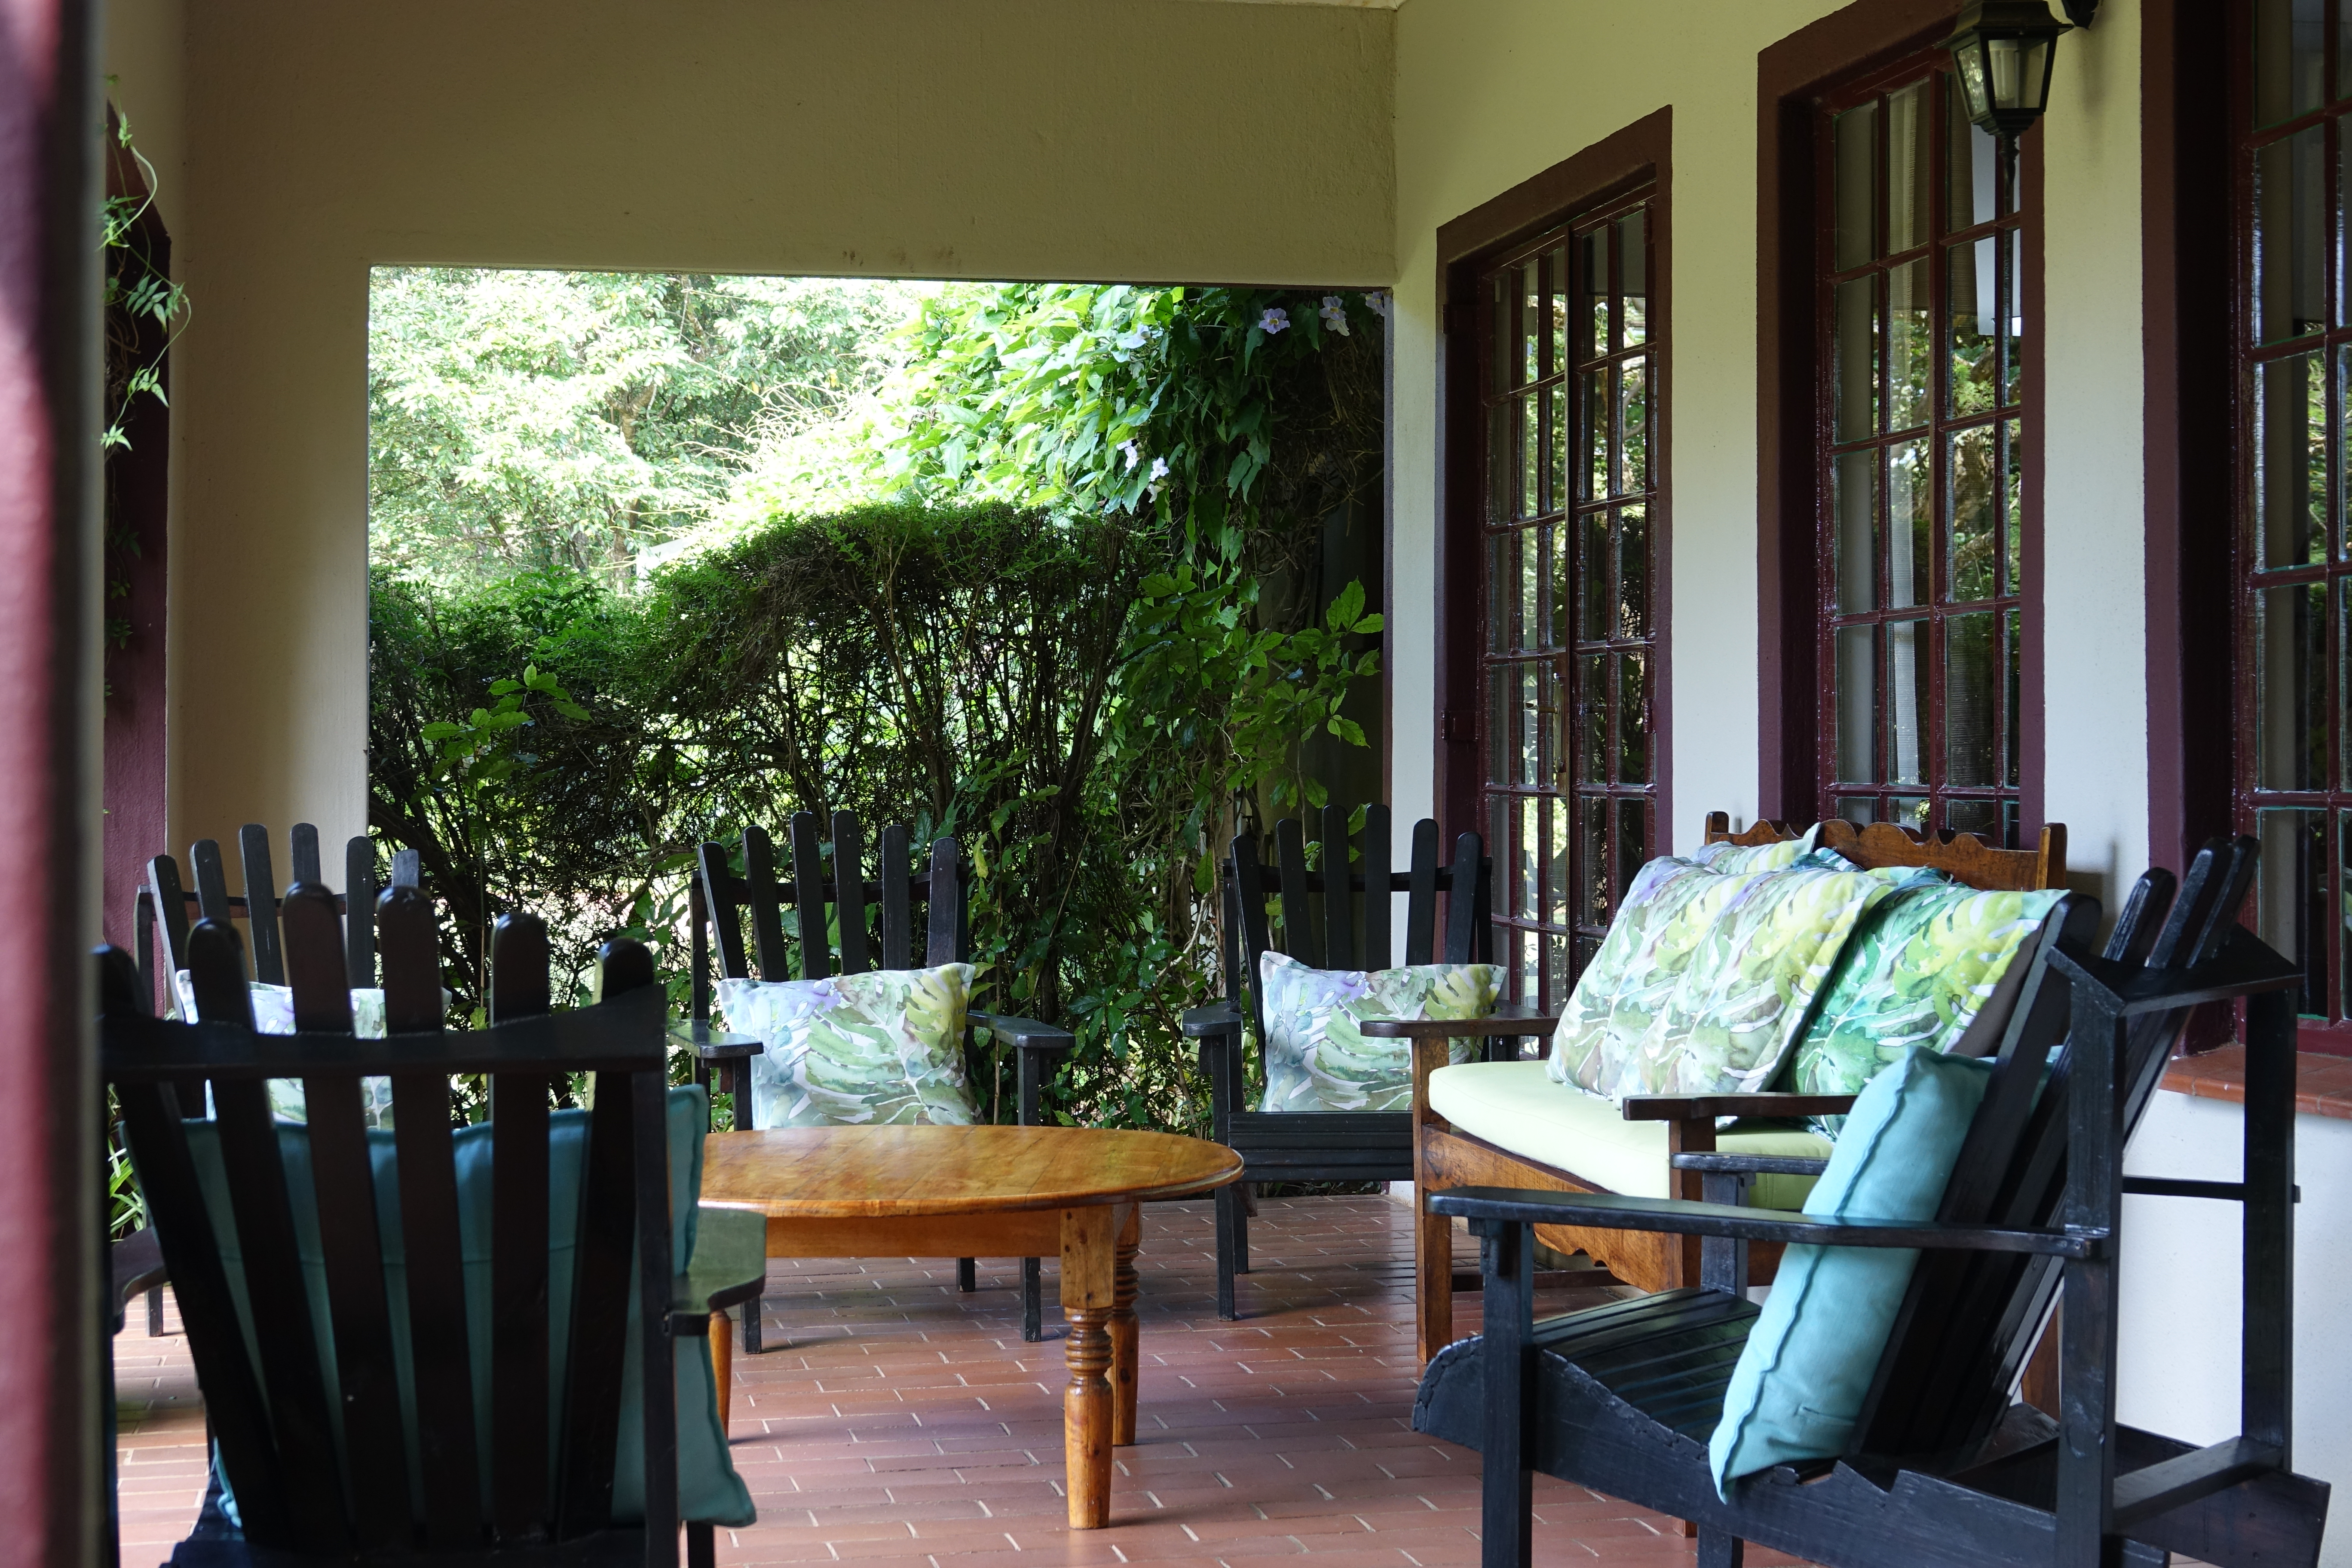 An outside look of the peaceful porch at Ekukhanyeni, with 4 chairs surrounding a table